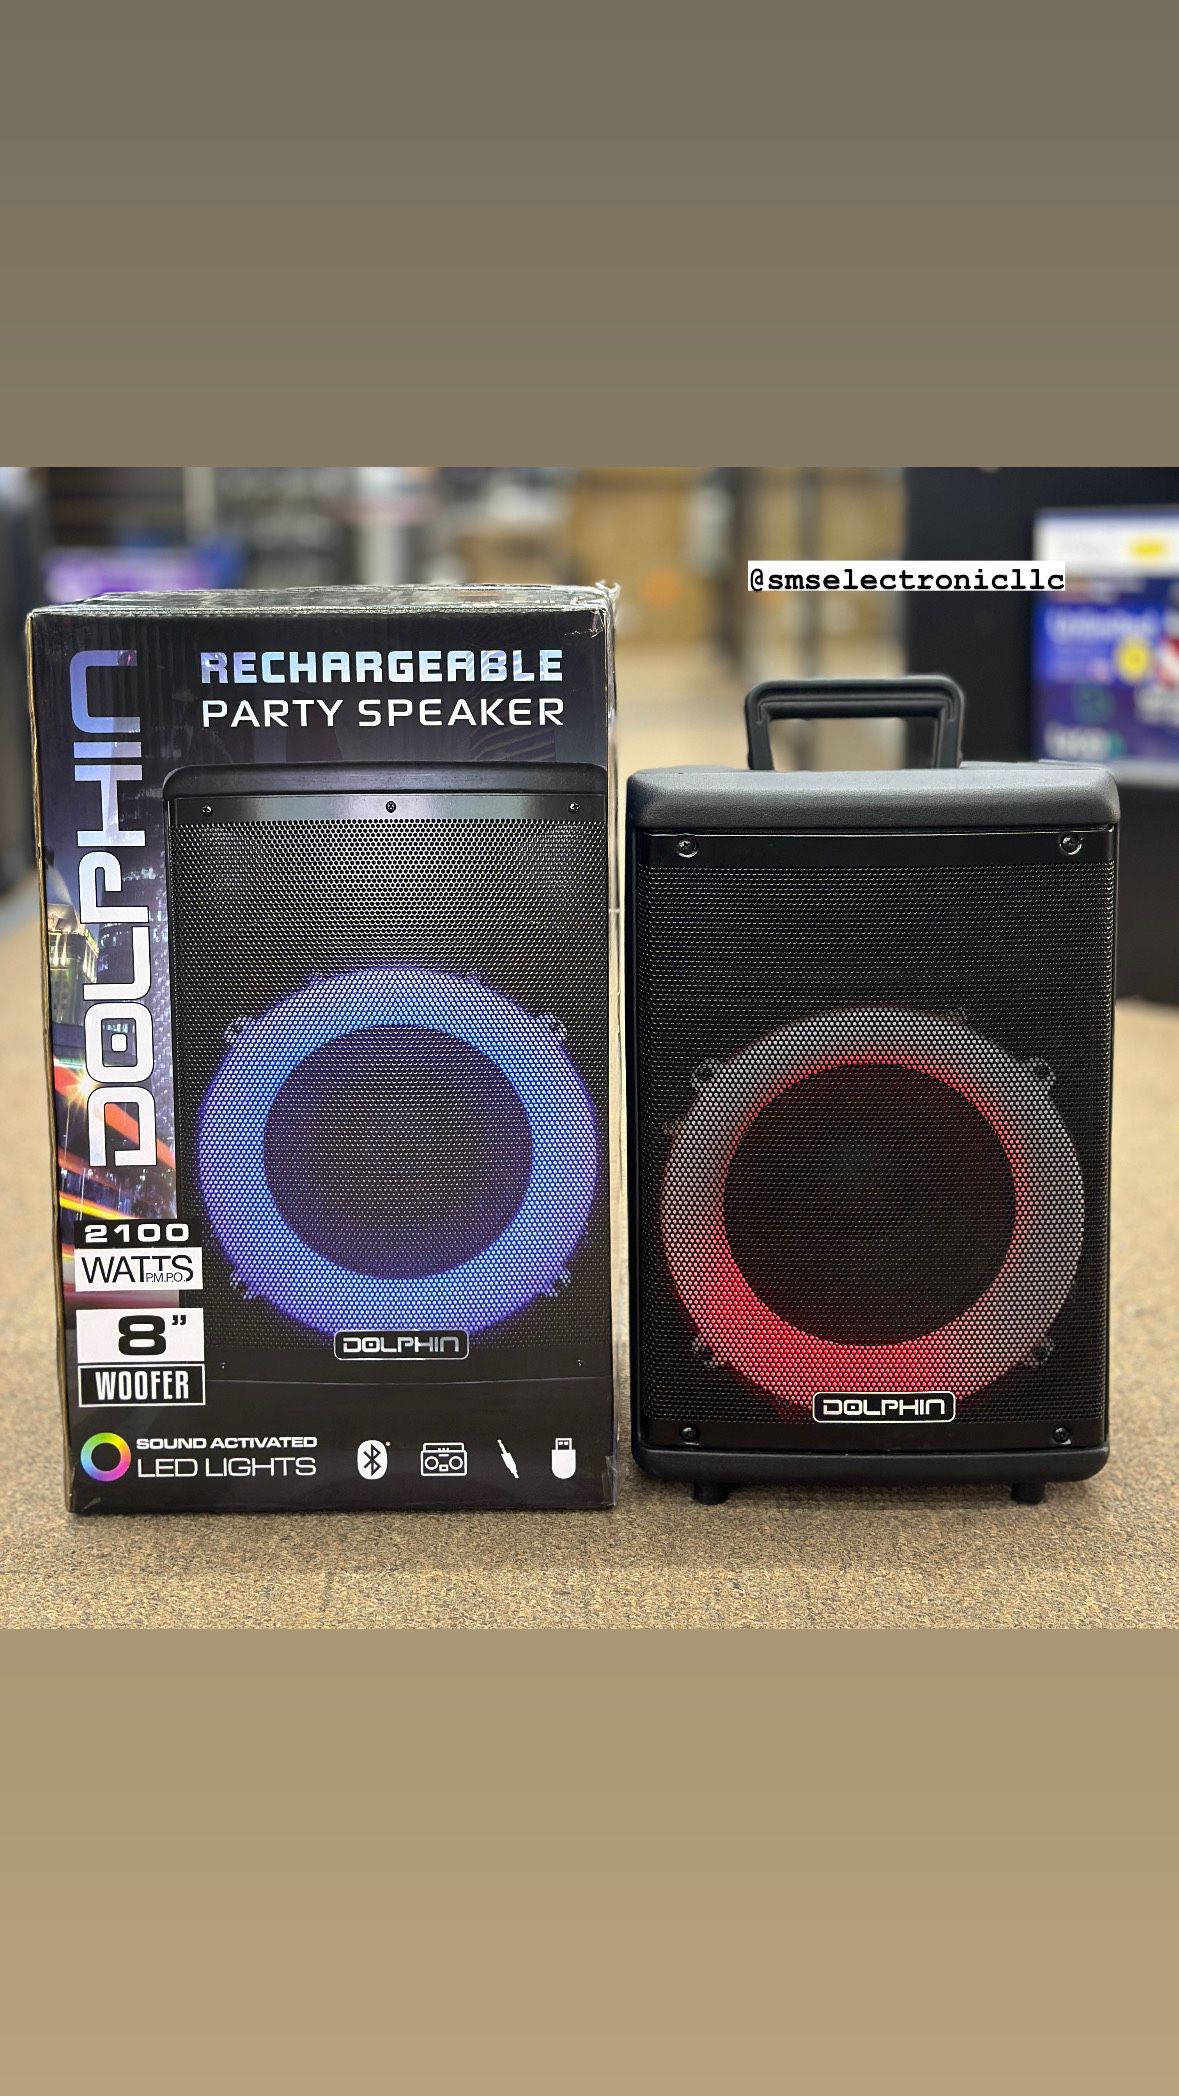 Bluetooth Party Speaker, Compact and Featuring an 8" Woofer